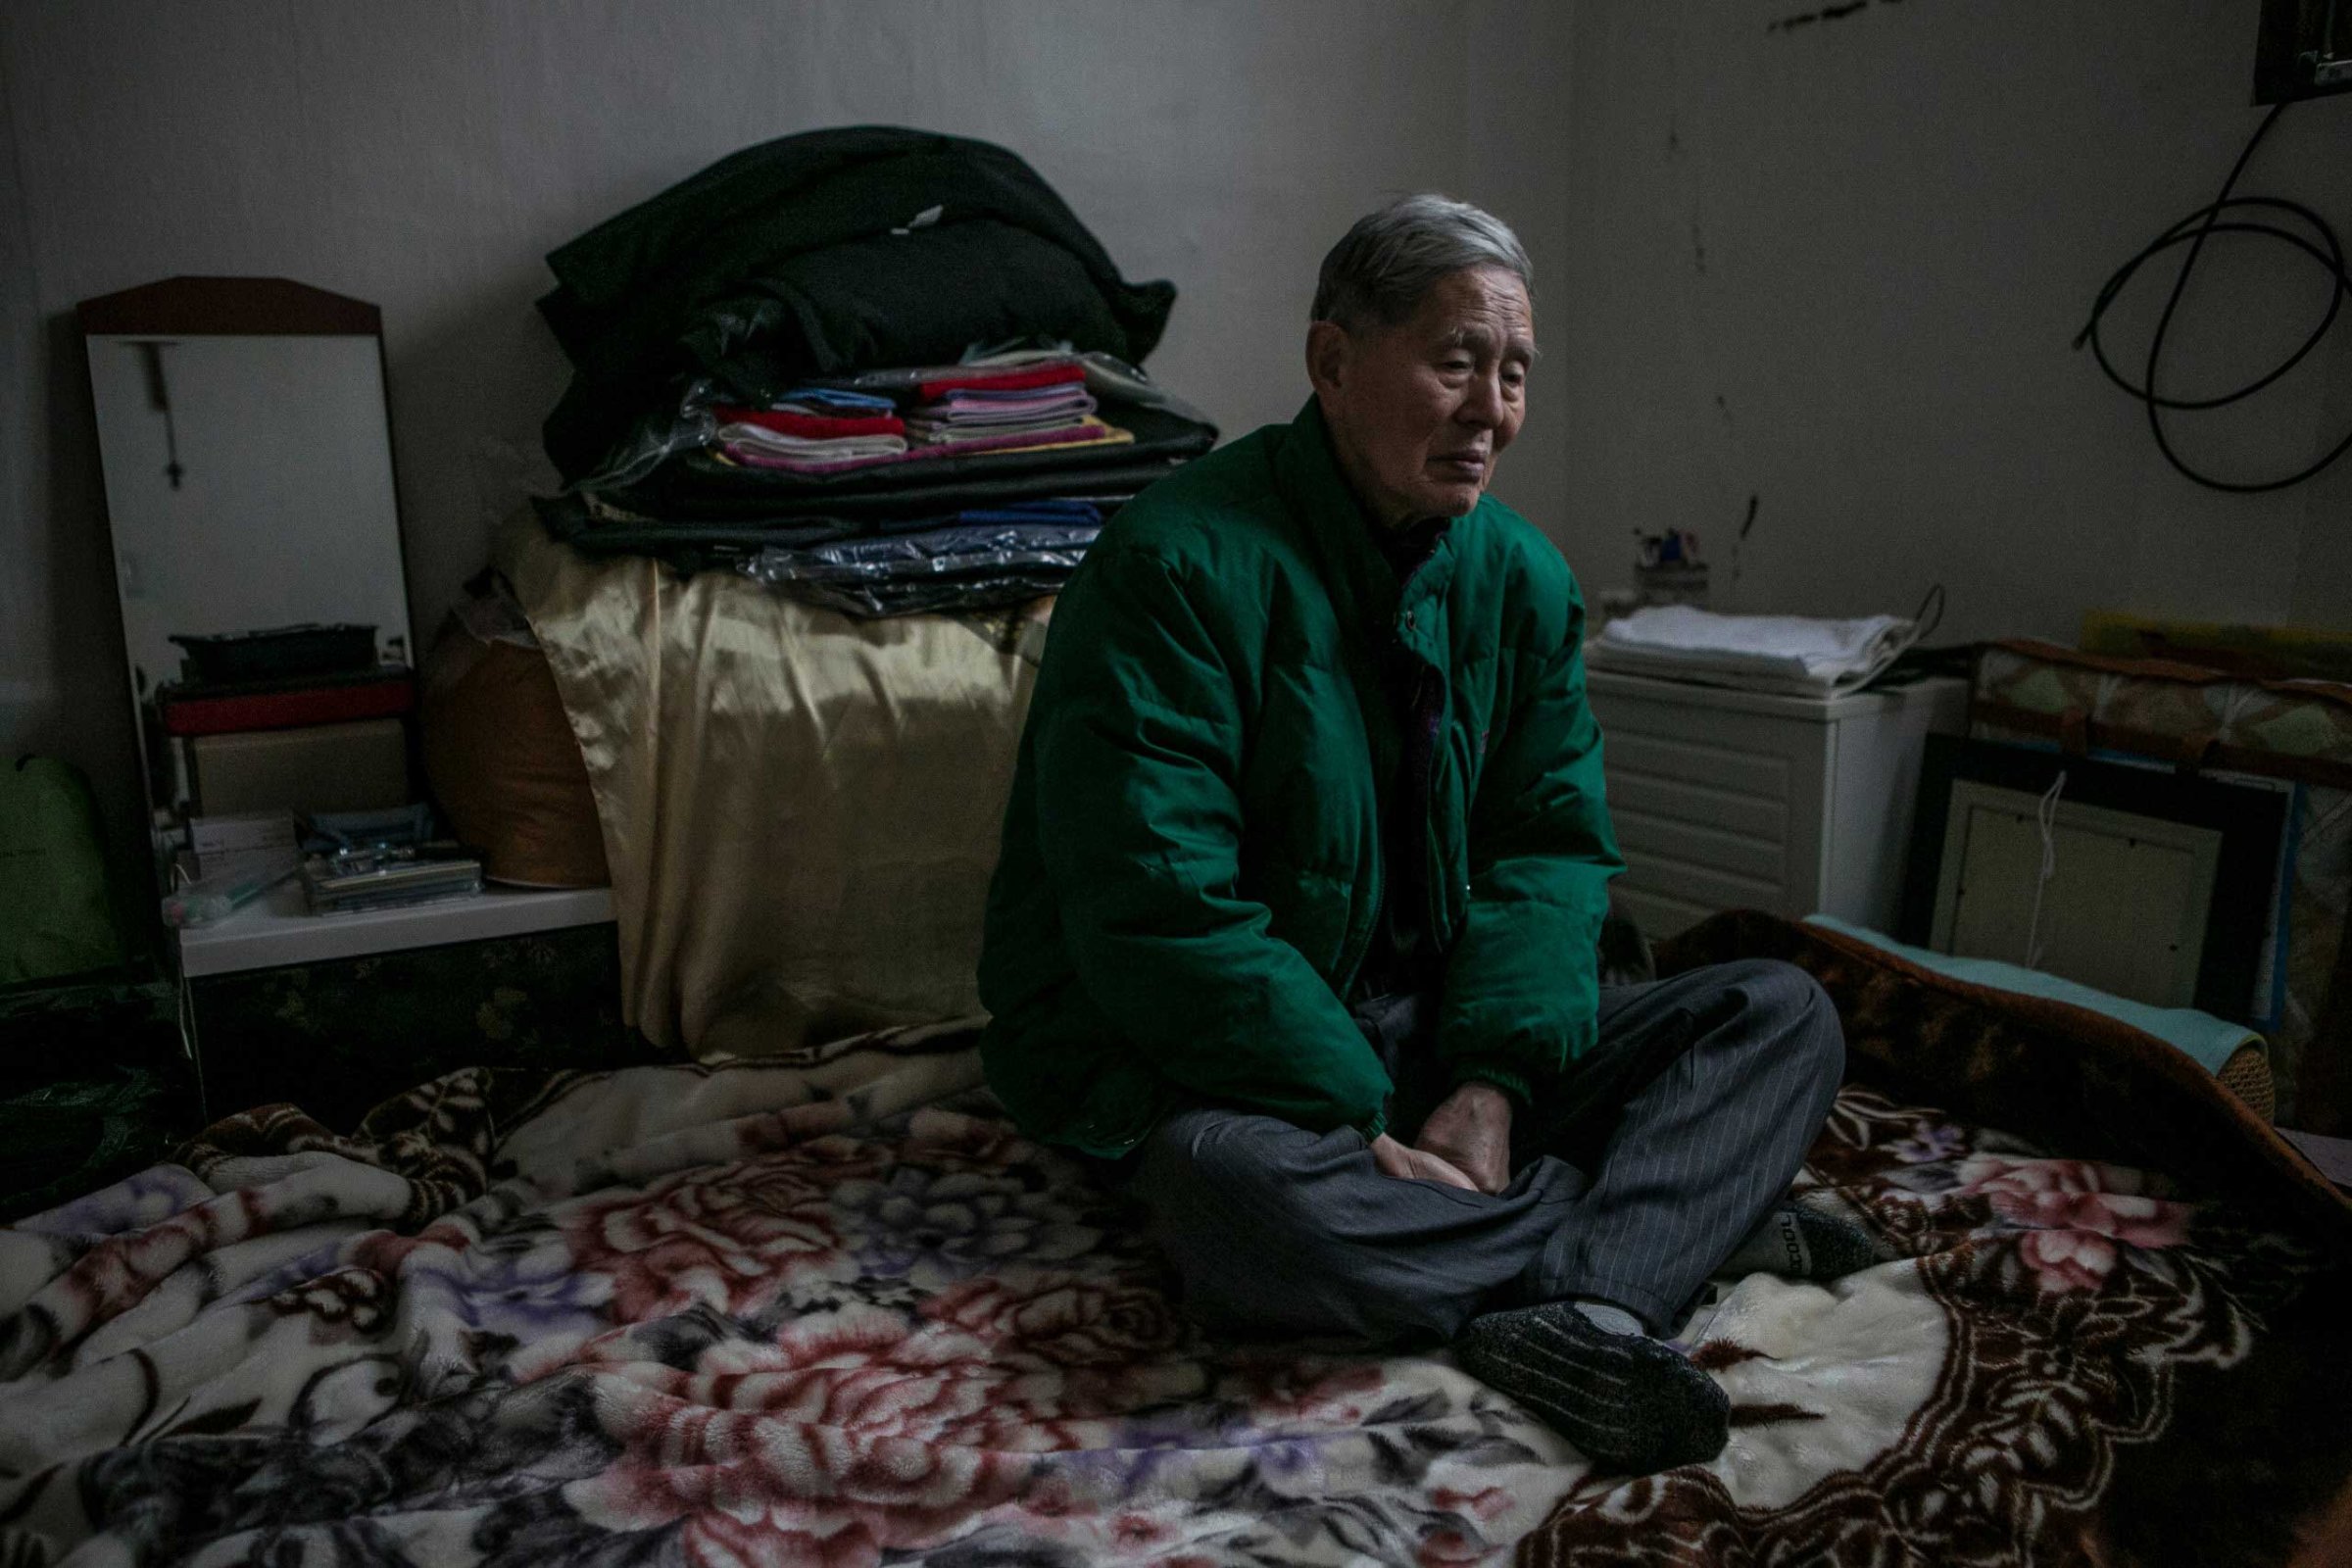 Ham Hak-joon sits in his one-room home on top of the hill in Jongro District, Seoul, South Korea in December 27, 2014. Ham, an 86-year-old man who lives by himself, has been out of contact with two of his grown-up children for more than 30 years. He has arranged a funeral with Good Nanum when the time comes.